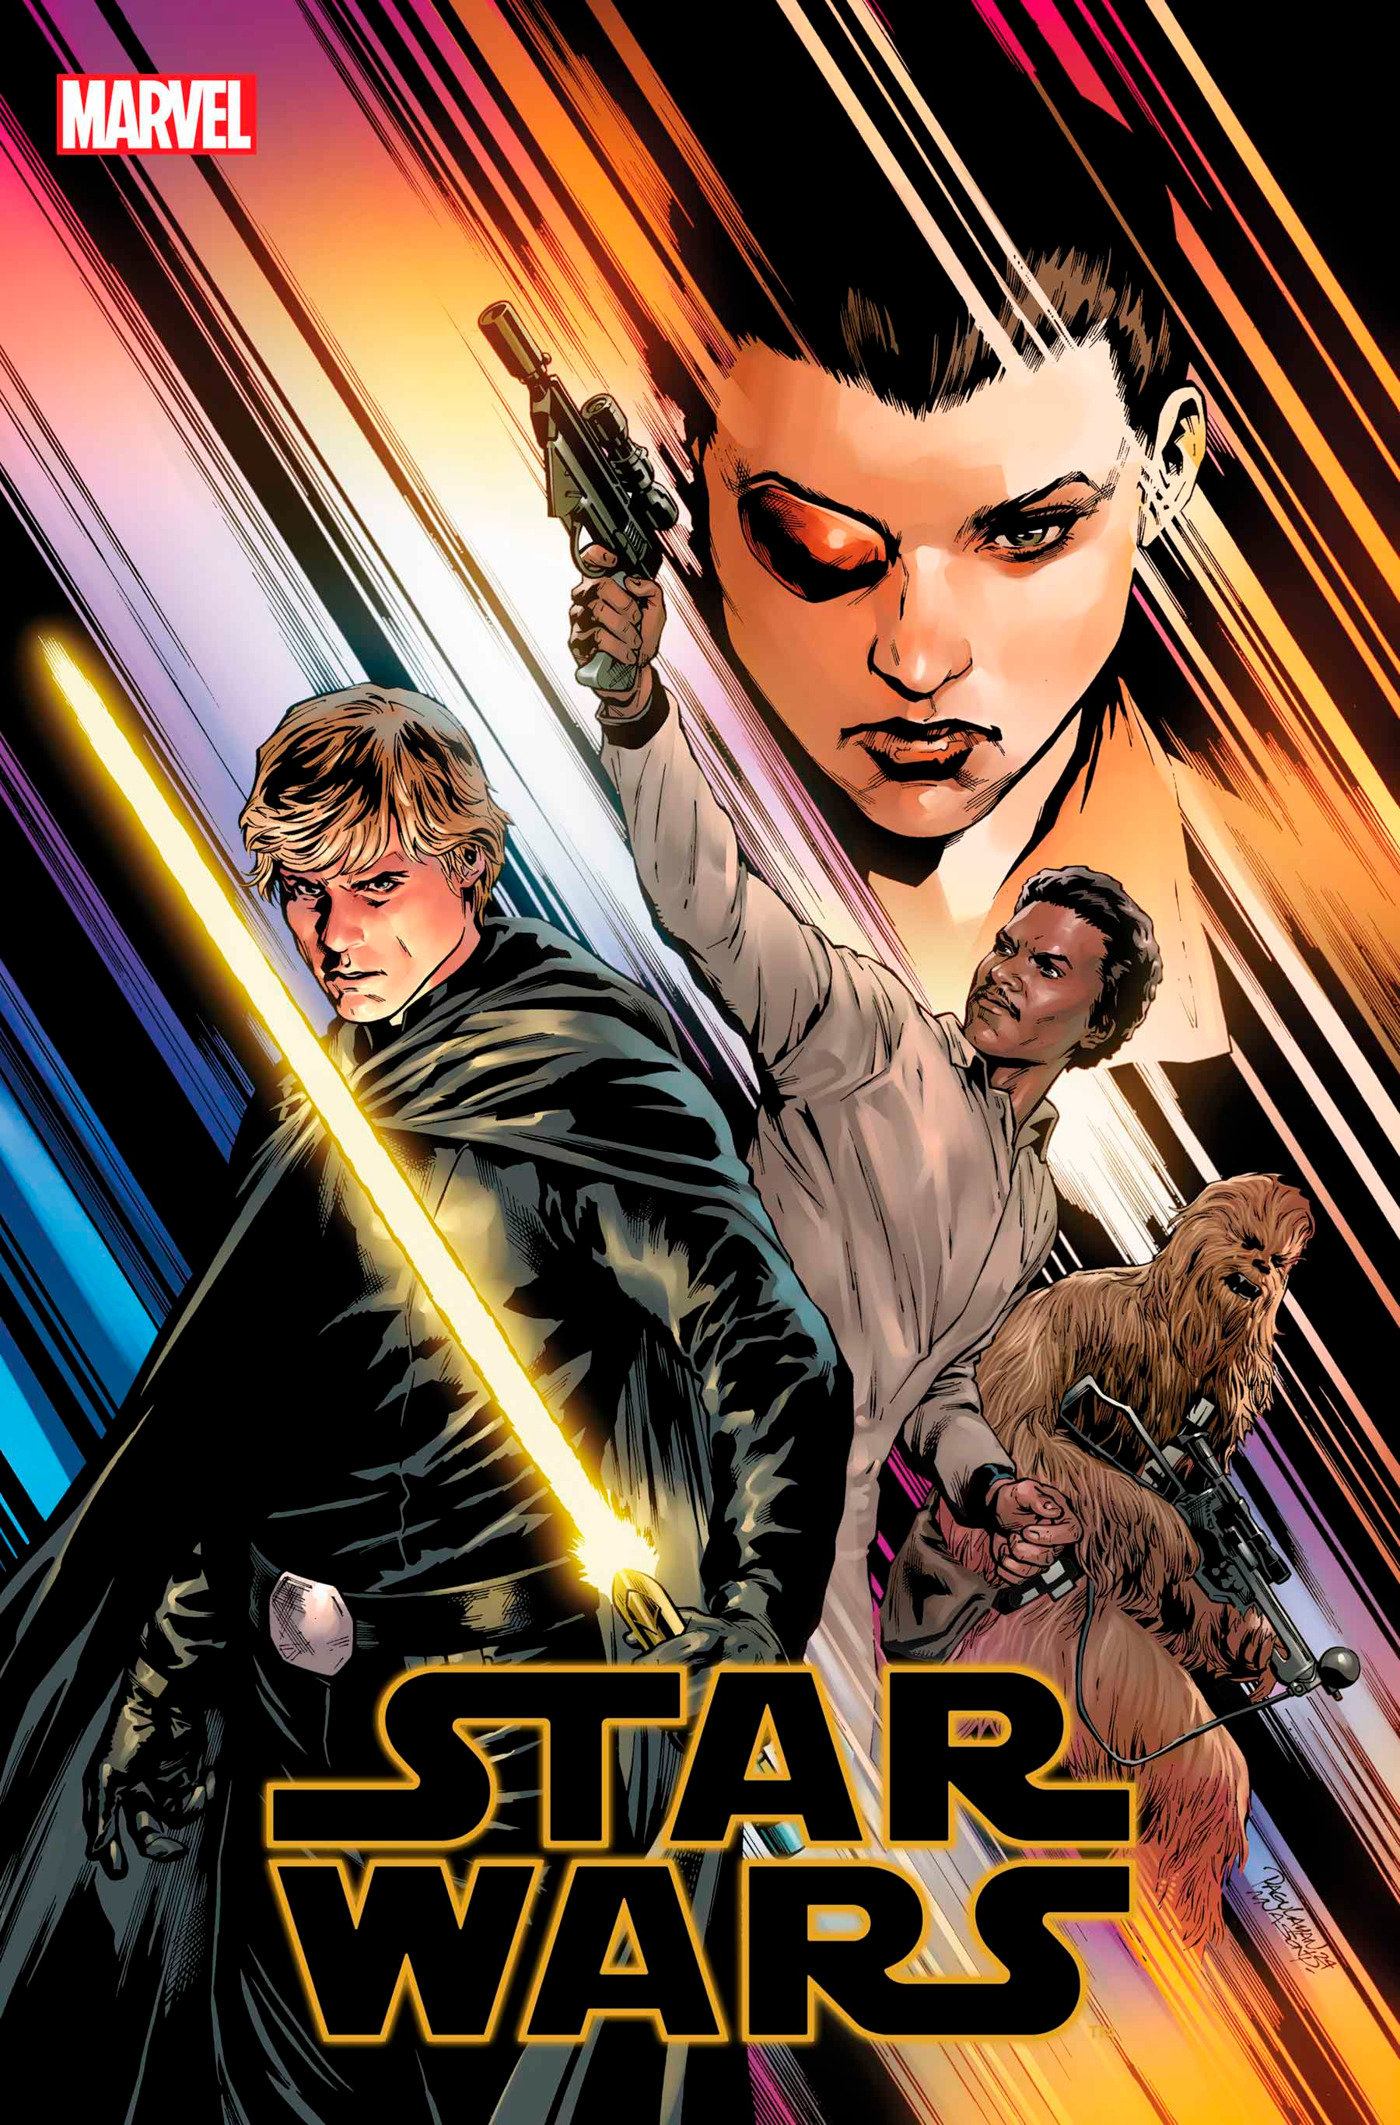 Star Wars #47 Carlo Pagulayan Variant 1 for 25 Incentive